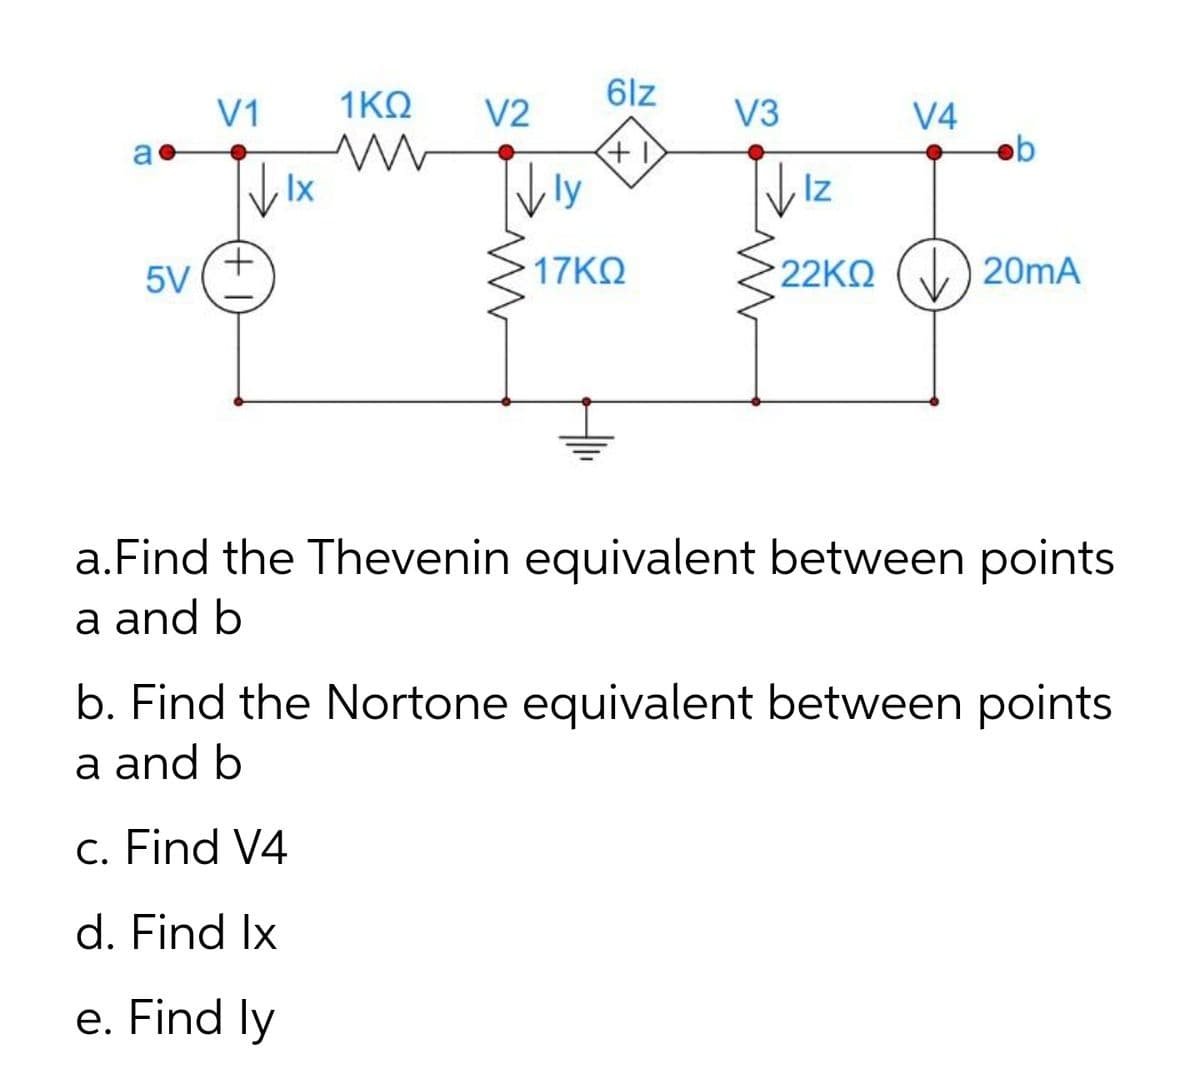 6lz
V1
1ΚΩ
V2
V3
V4
ob
a
Ix
ly
Iz
5V
17ΚΩ
22KN () 20mA
a.Find the Thevenin equivalent between points
a and b
b. Find the Nortone equivalent between points
a and b
c. Find V4
d. Find Ix
e. Find ly
